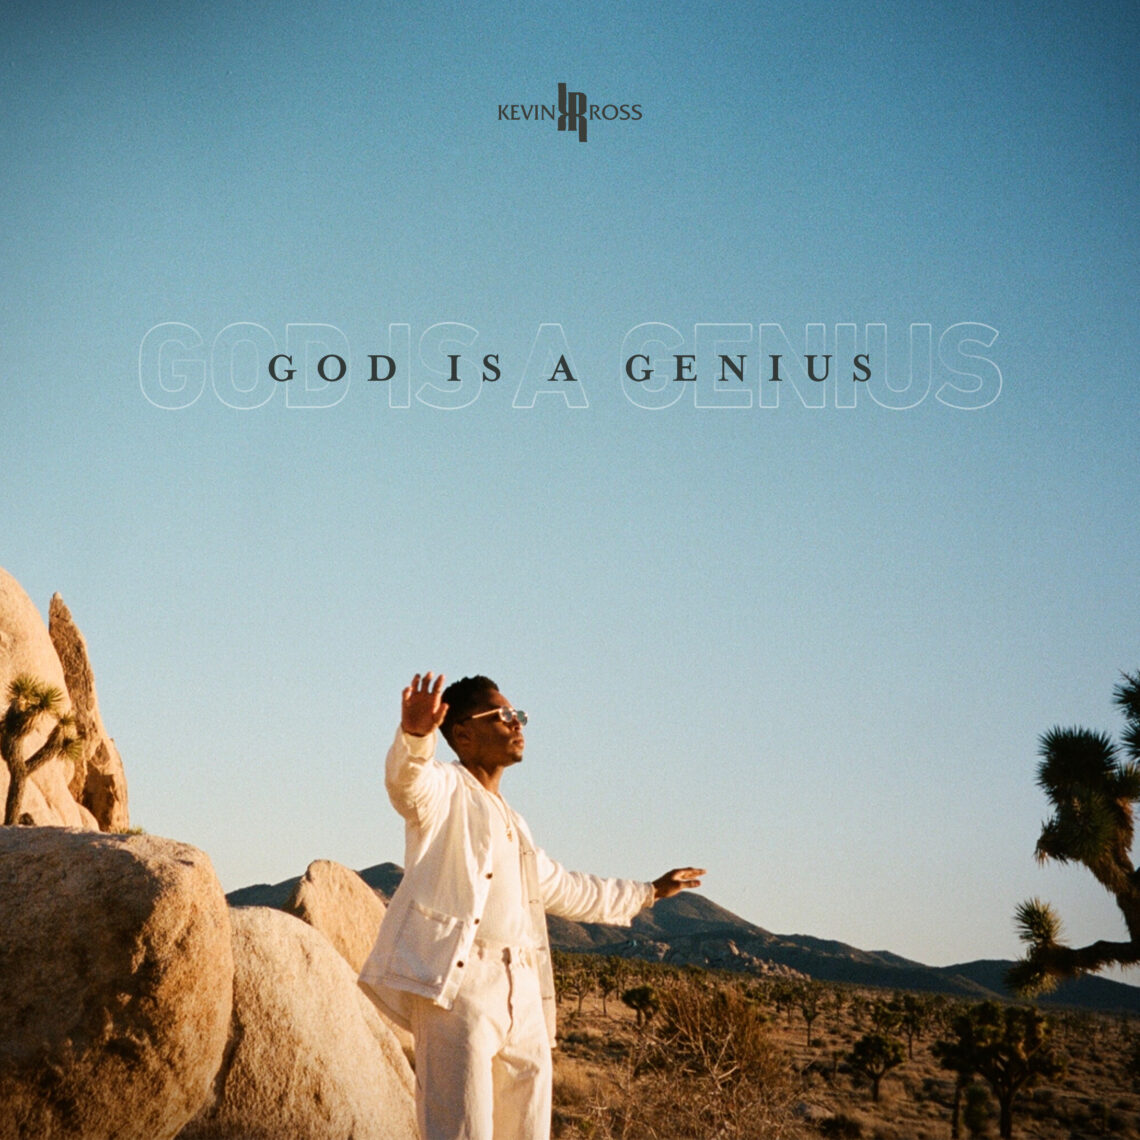 New Music: Kevin Ross - God is a Genius